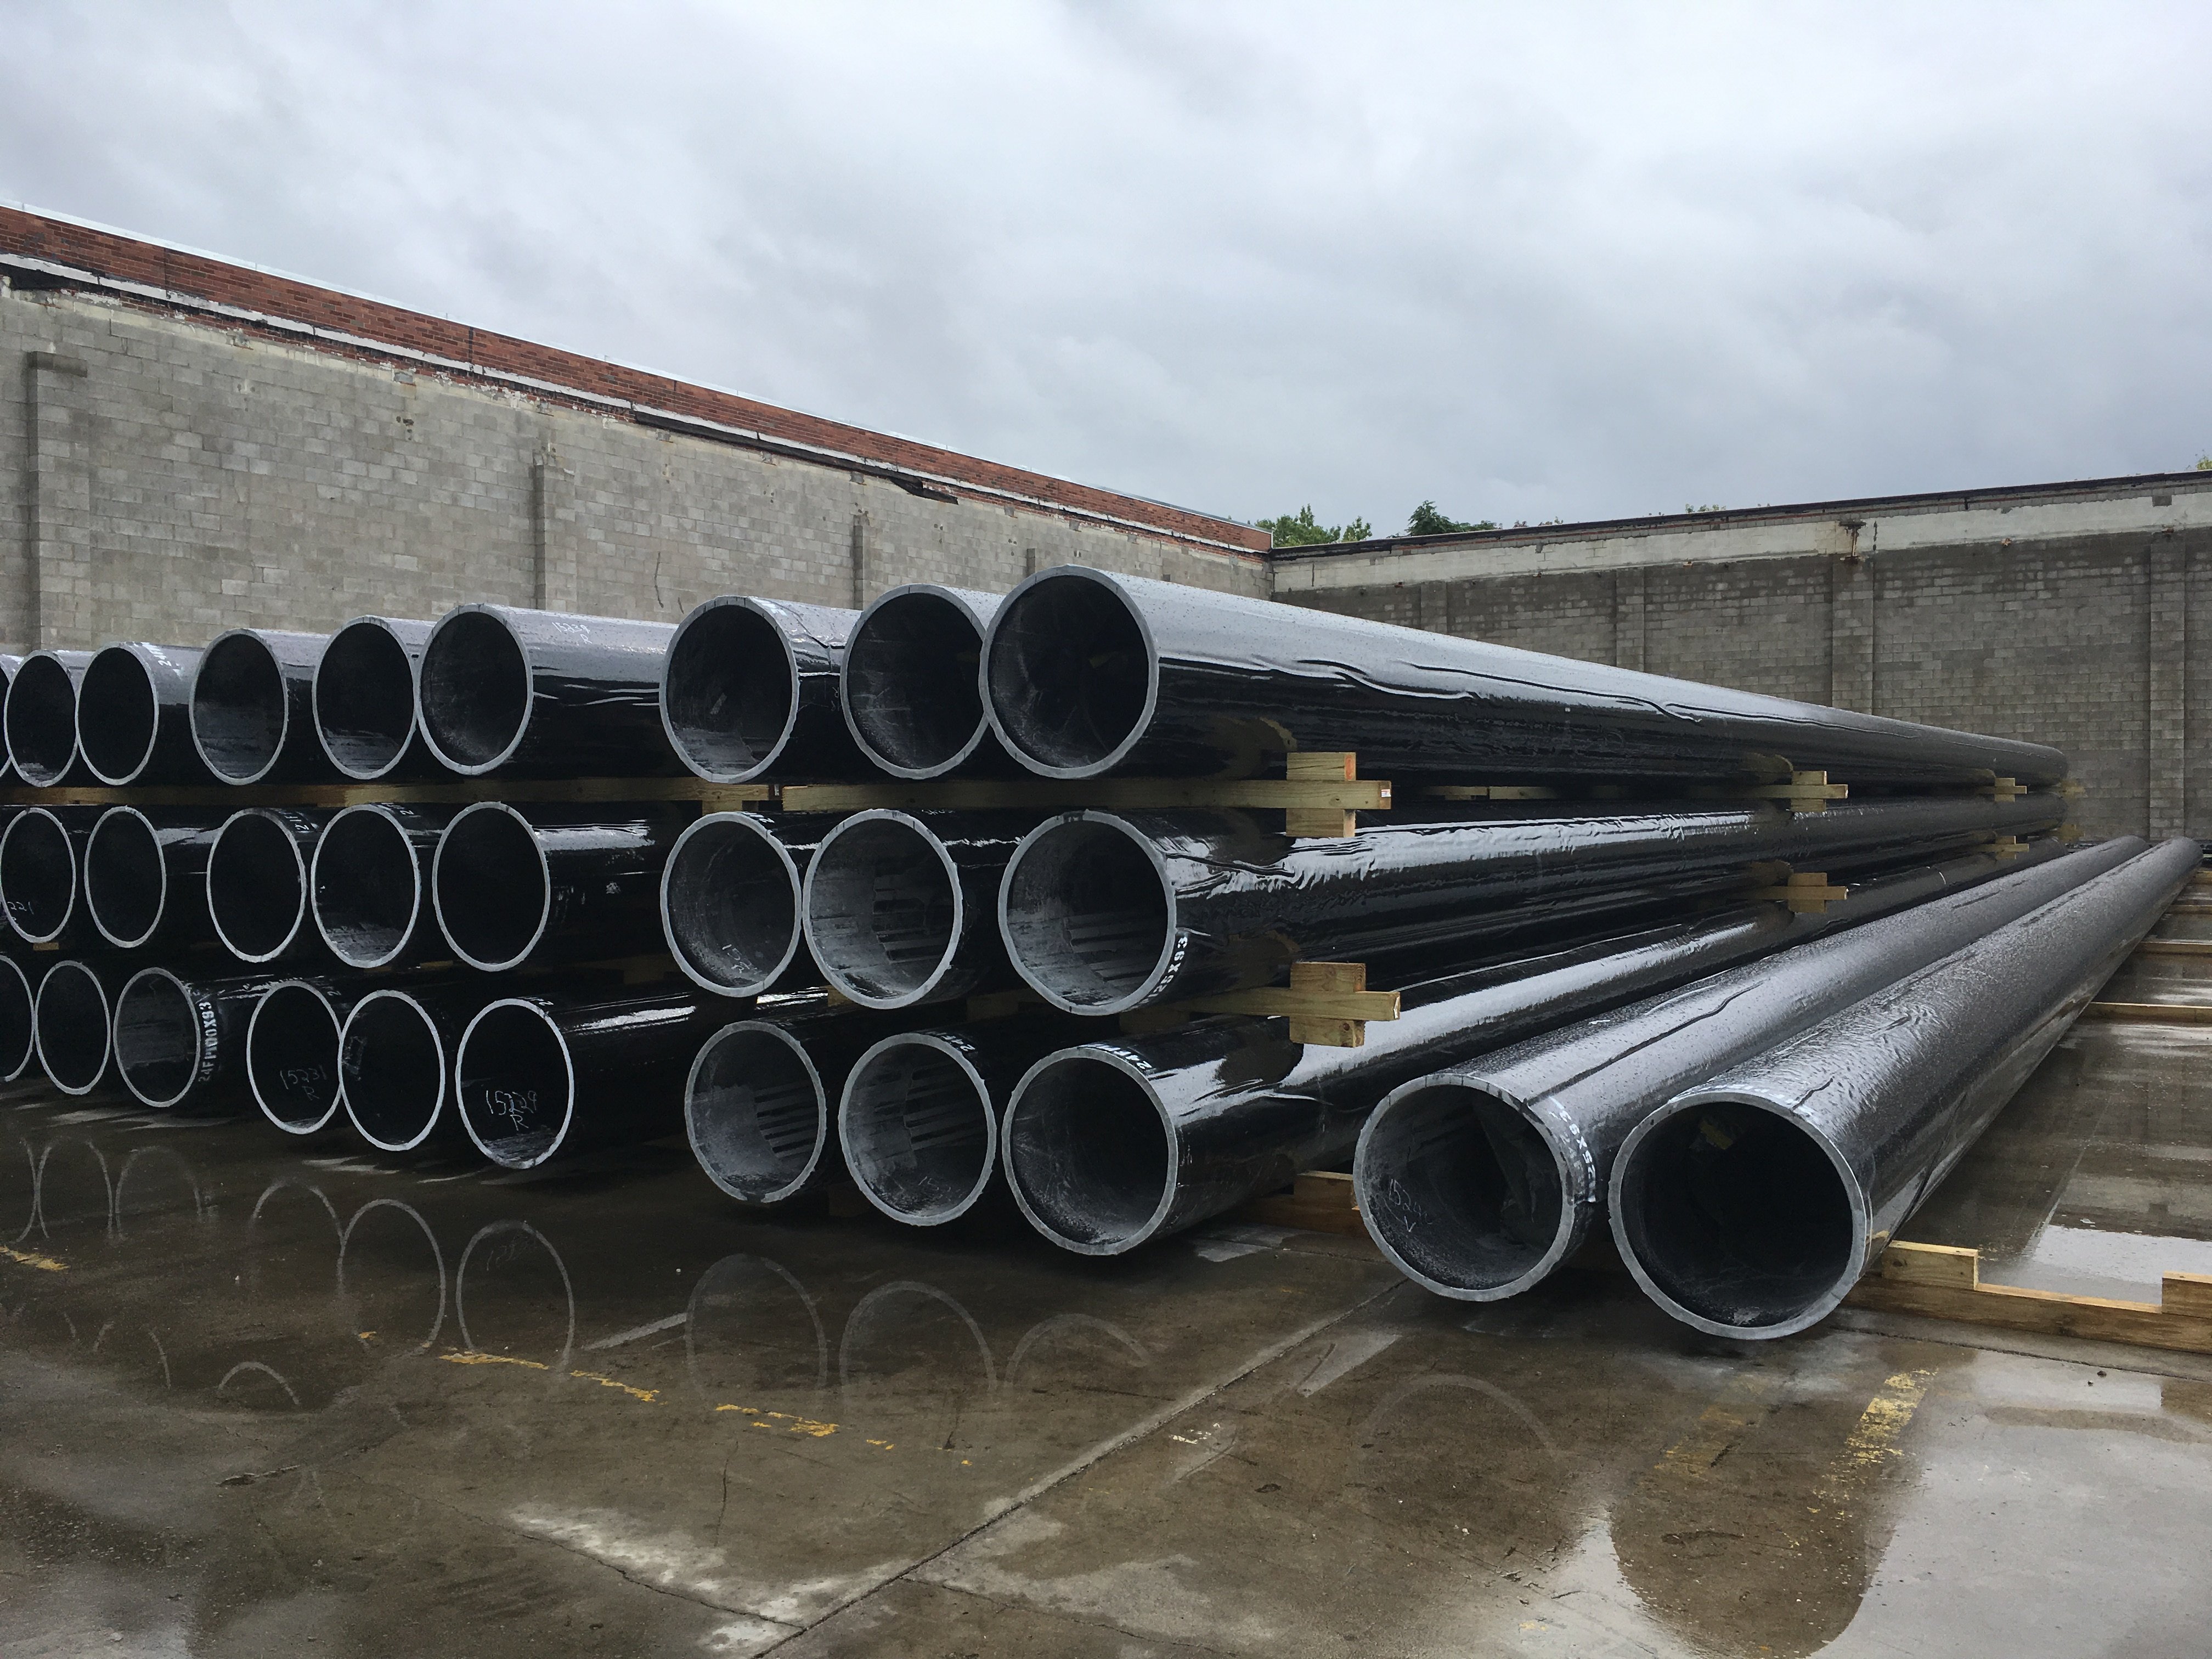 Eco-Friendly, Corrosion-Resistant FRP Composite Piles Are Strong As Steel But Designed To Bend Upon Impact